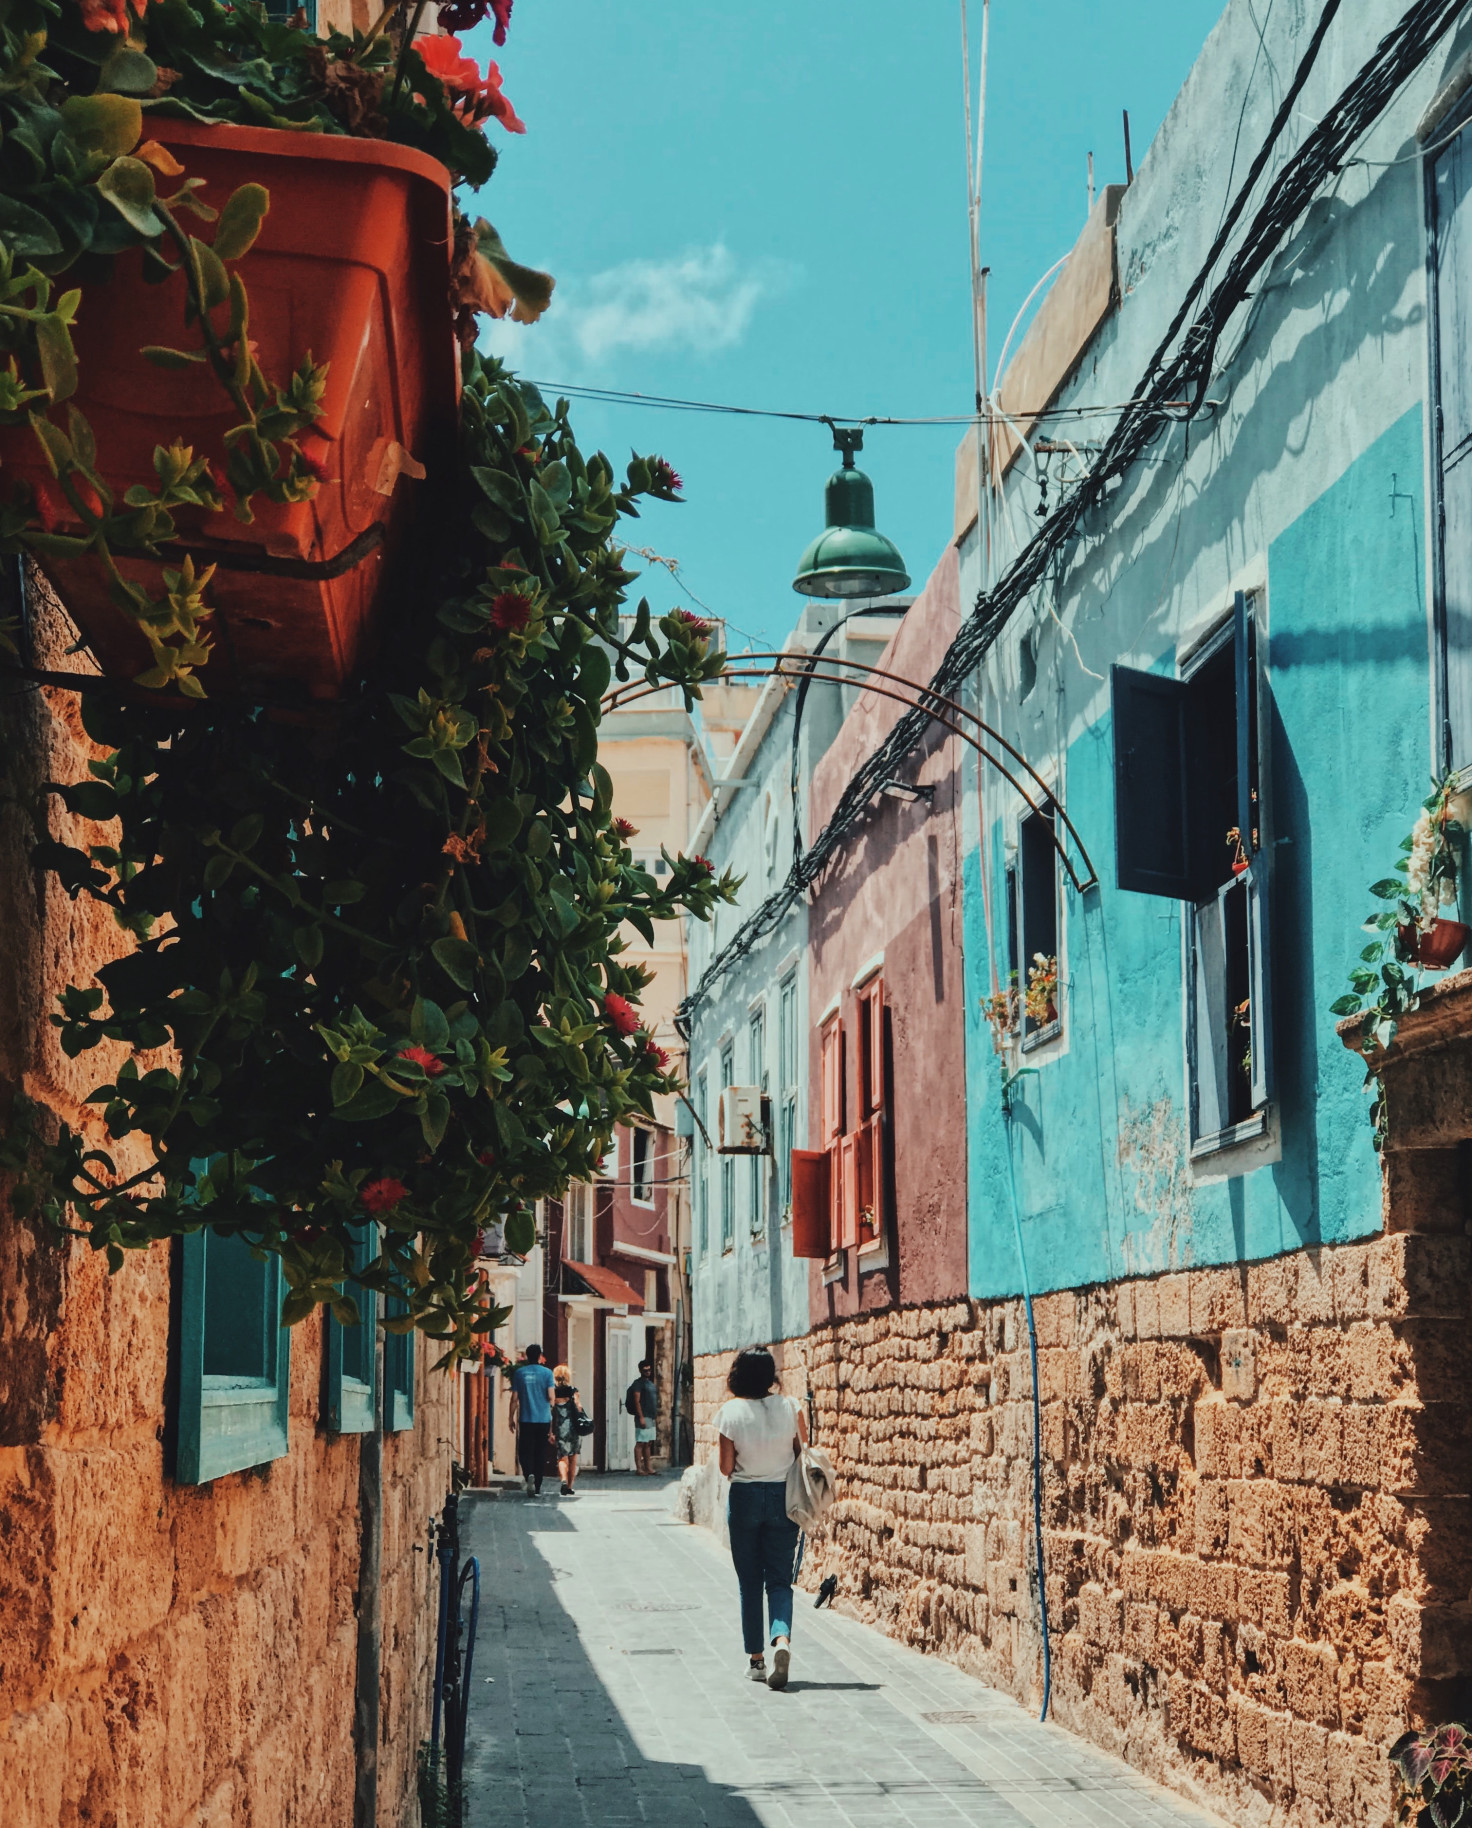 Girl walking down colorful street on a sunny day during daytime